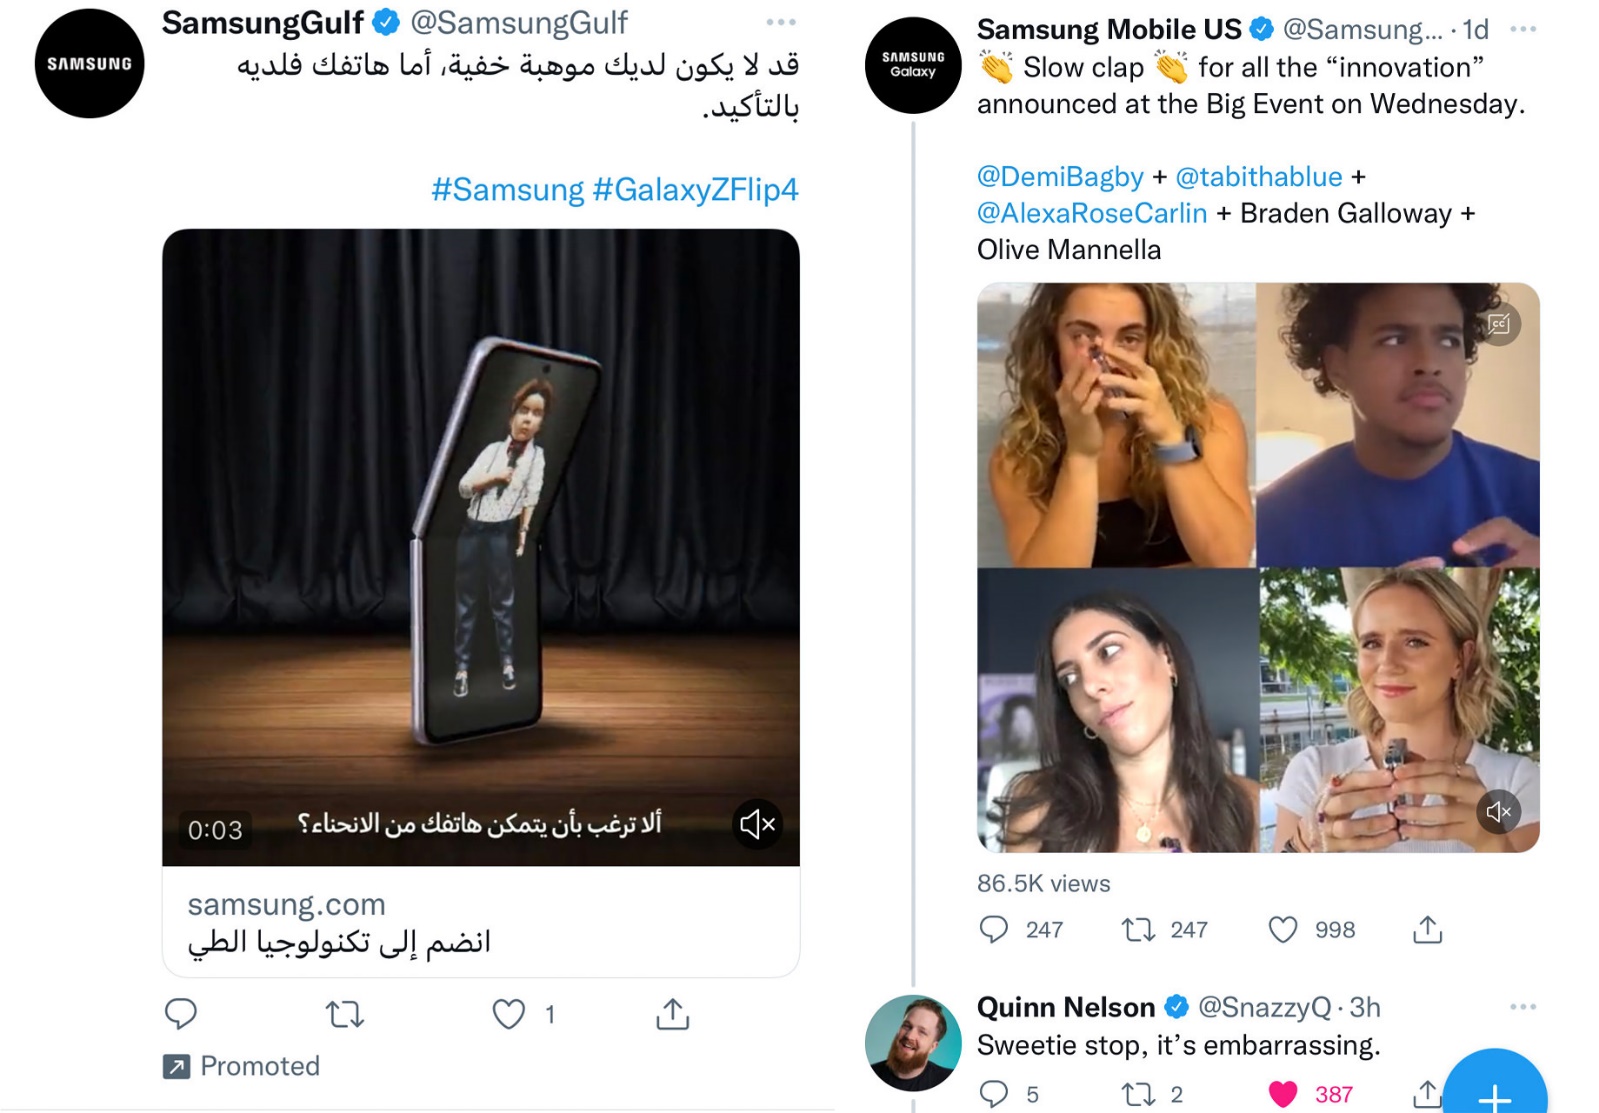 Samsung's Twitter ads against Apple's iPhone 14